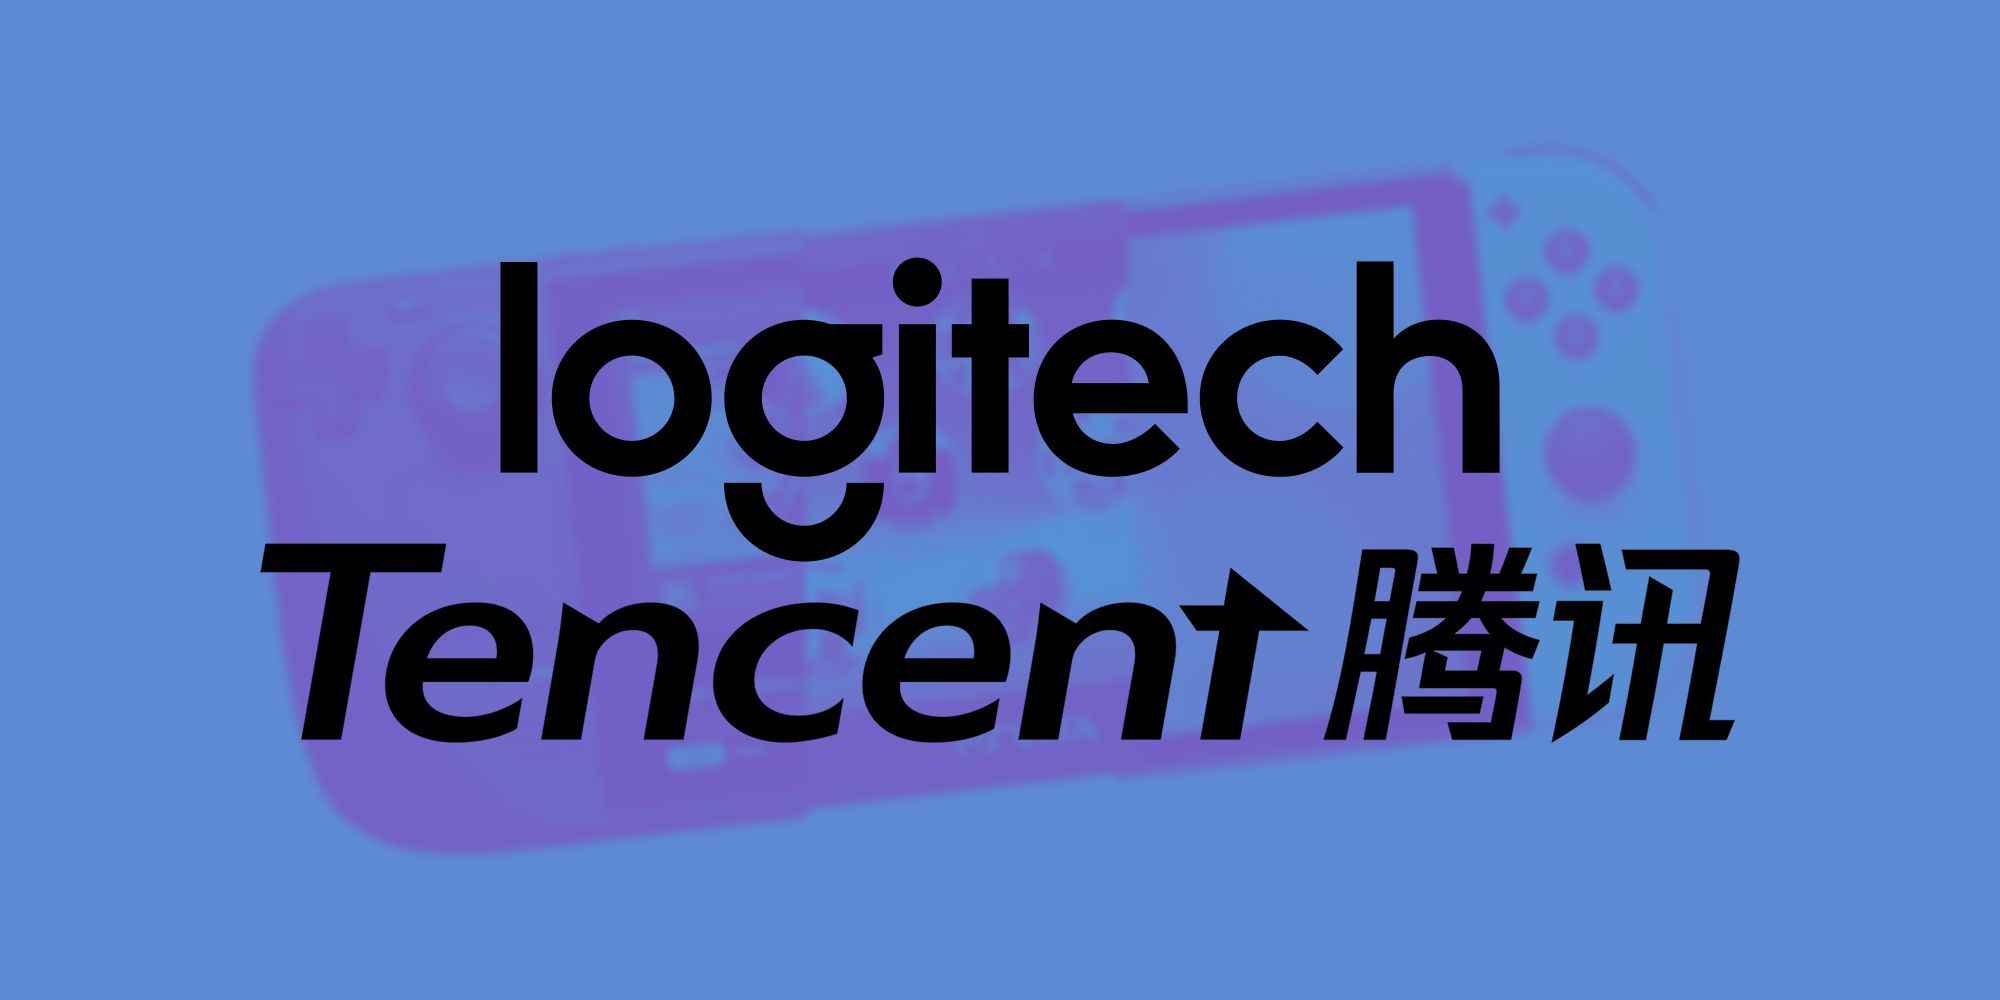 Logitech and Tencent logos one above the other